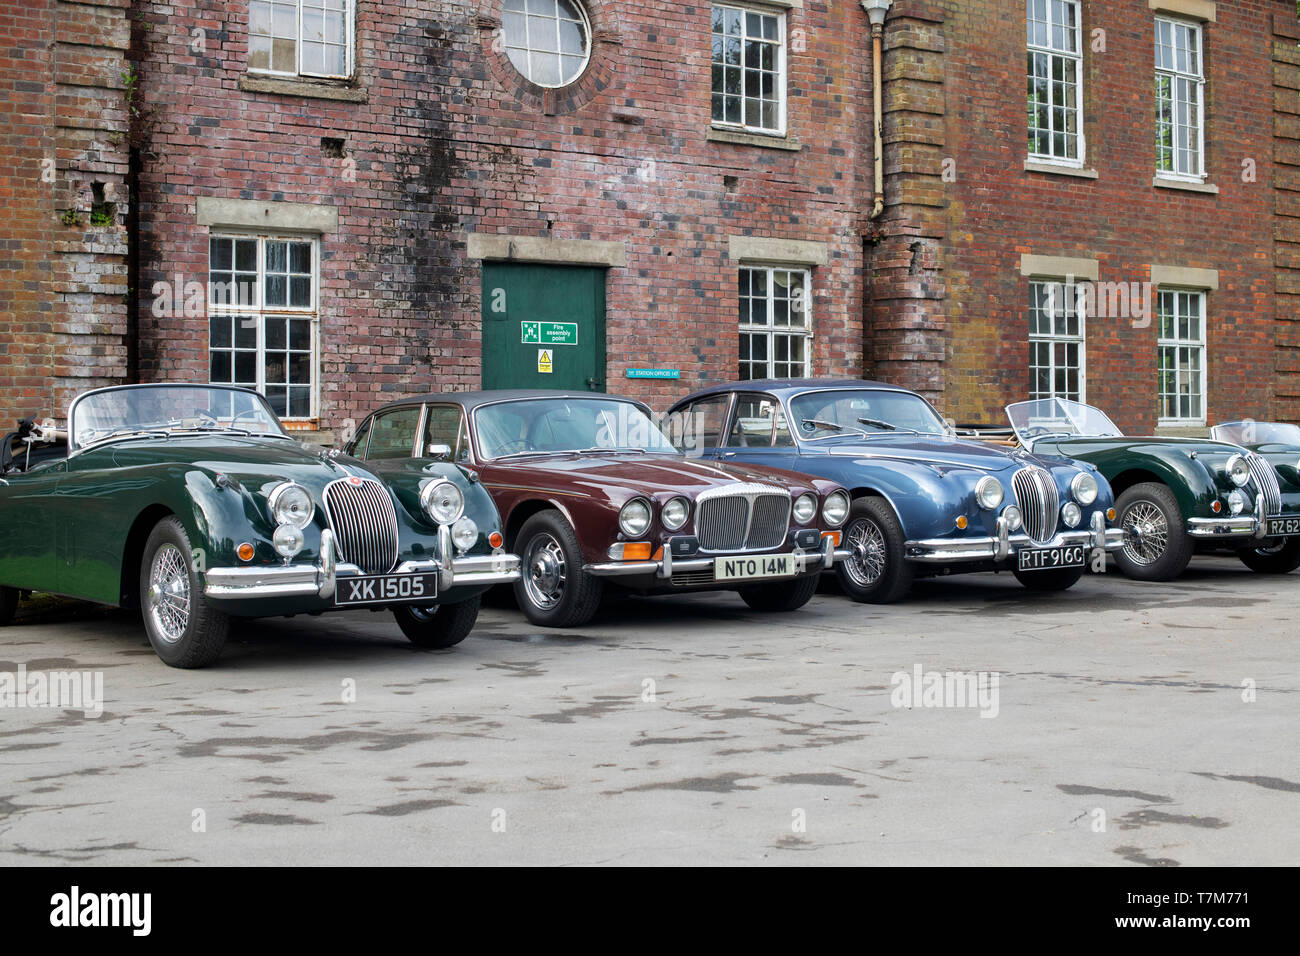 Vintage Jaguar and Daimler cars at Bicester Heritage Centre ‘Drive it day’. Bicester, Oxfordshire, England Stock Photo